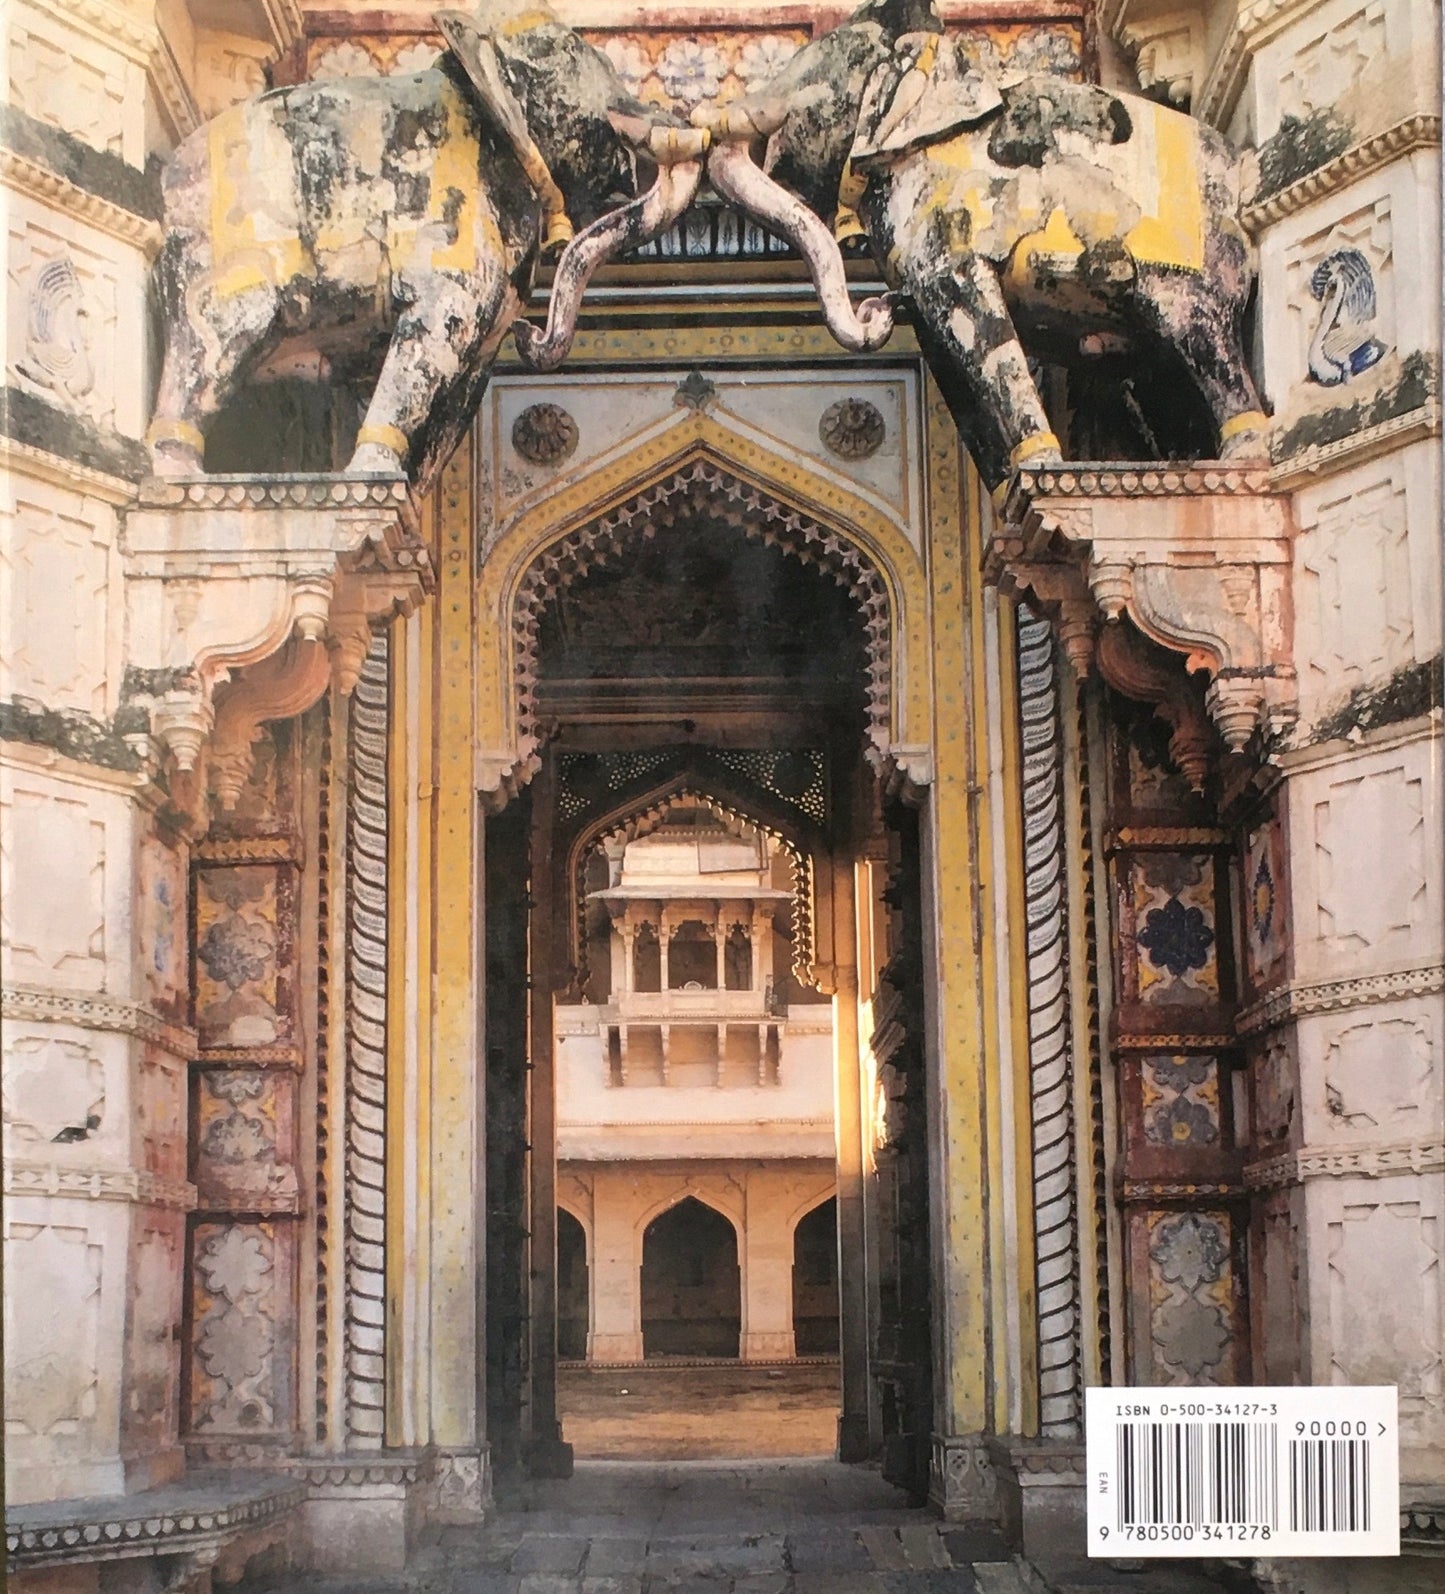 The Royal Palaces of India  George Michell